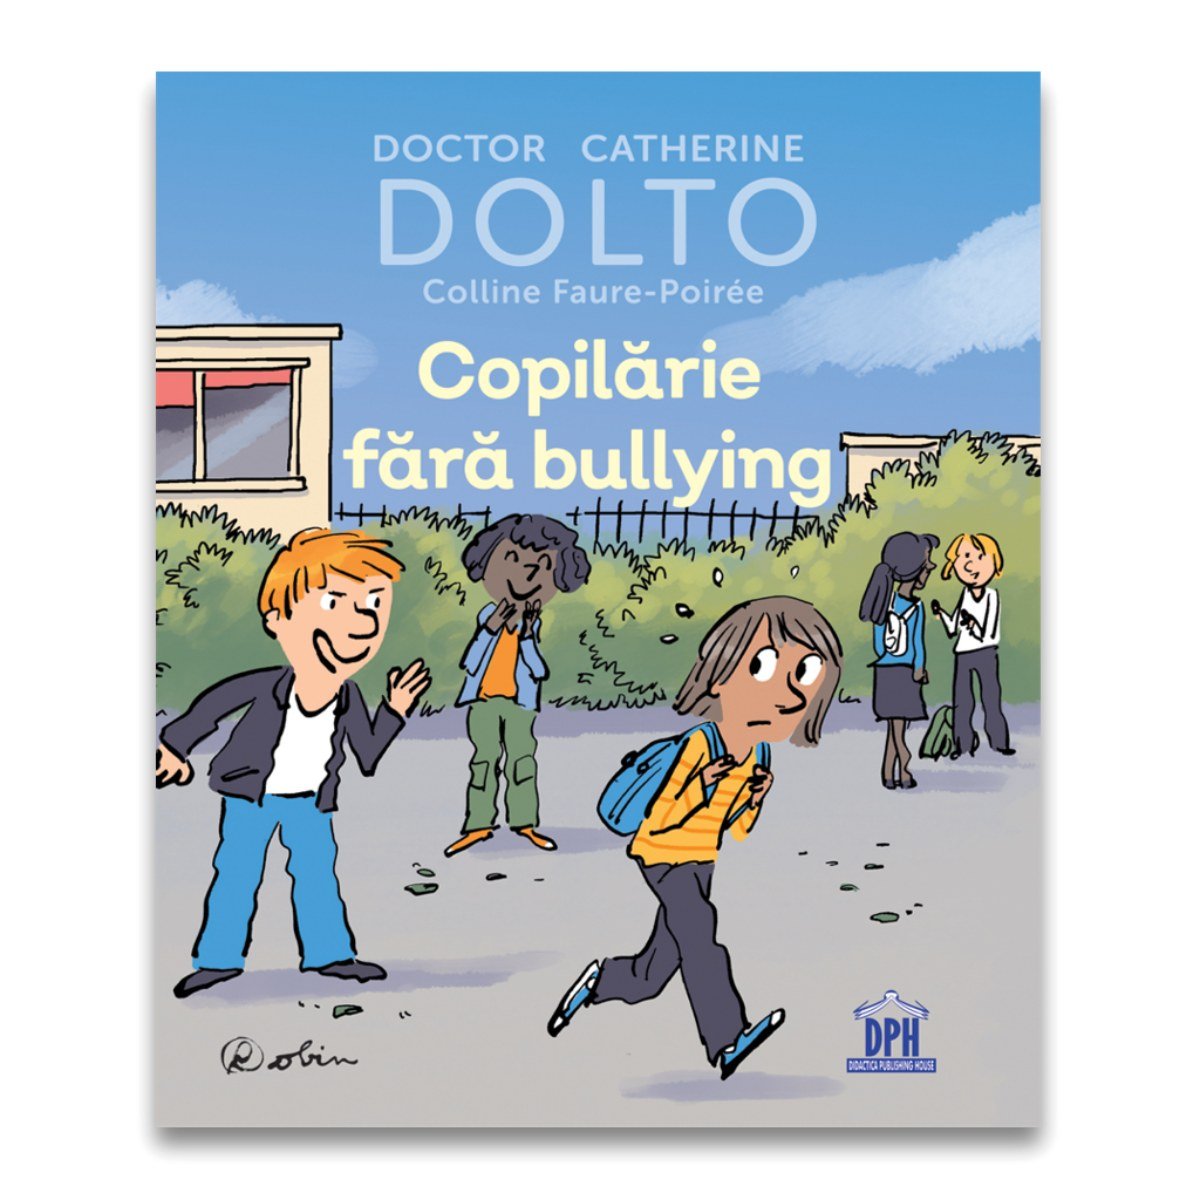 Copilarie fara bullying, Doctor Catherine Dolto, Colline Faure-Poiree bullying